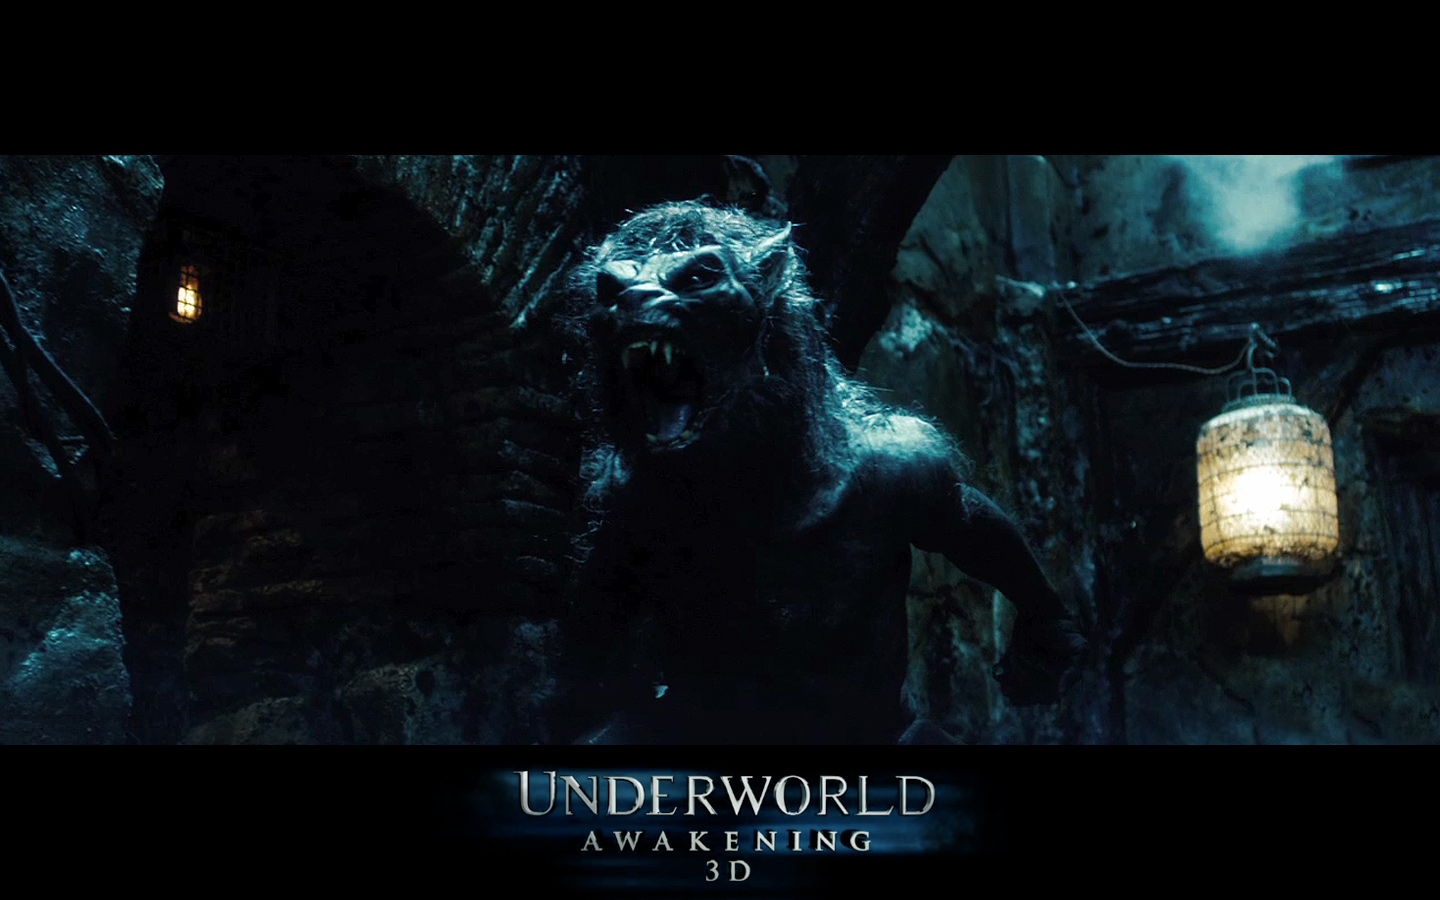 Underworld Lycan Wallpaper Image Amp Pictures Becuo